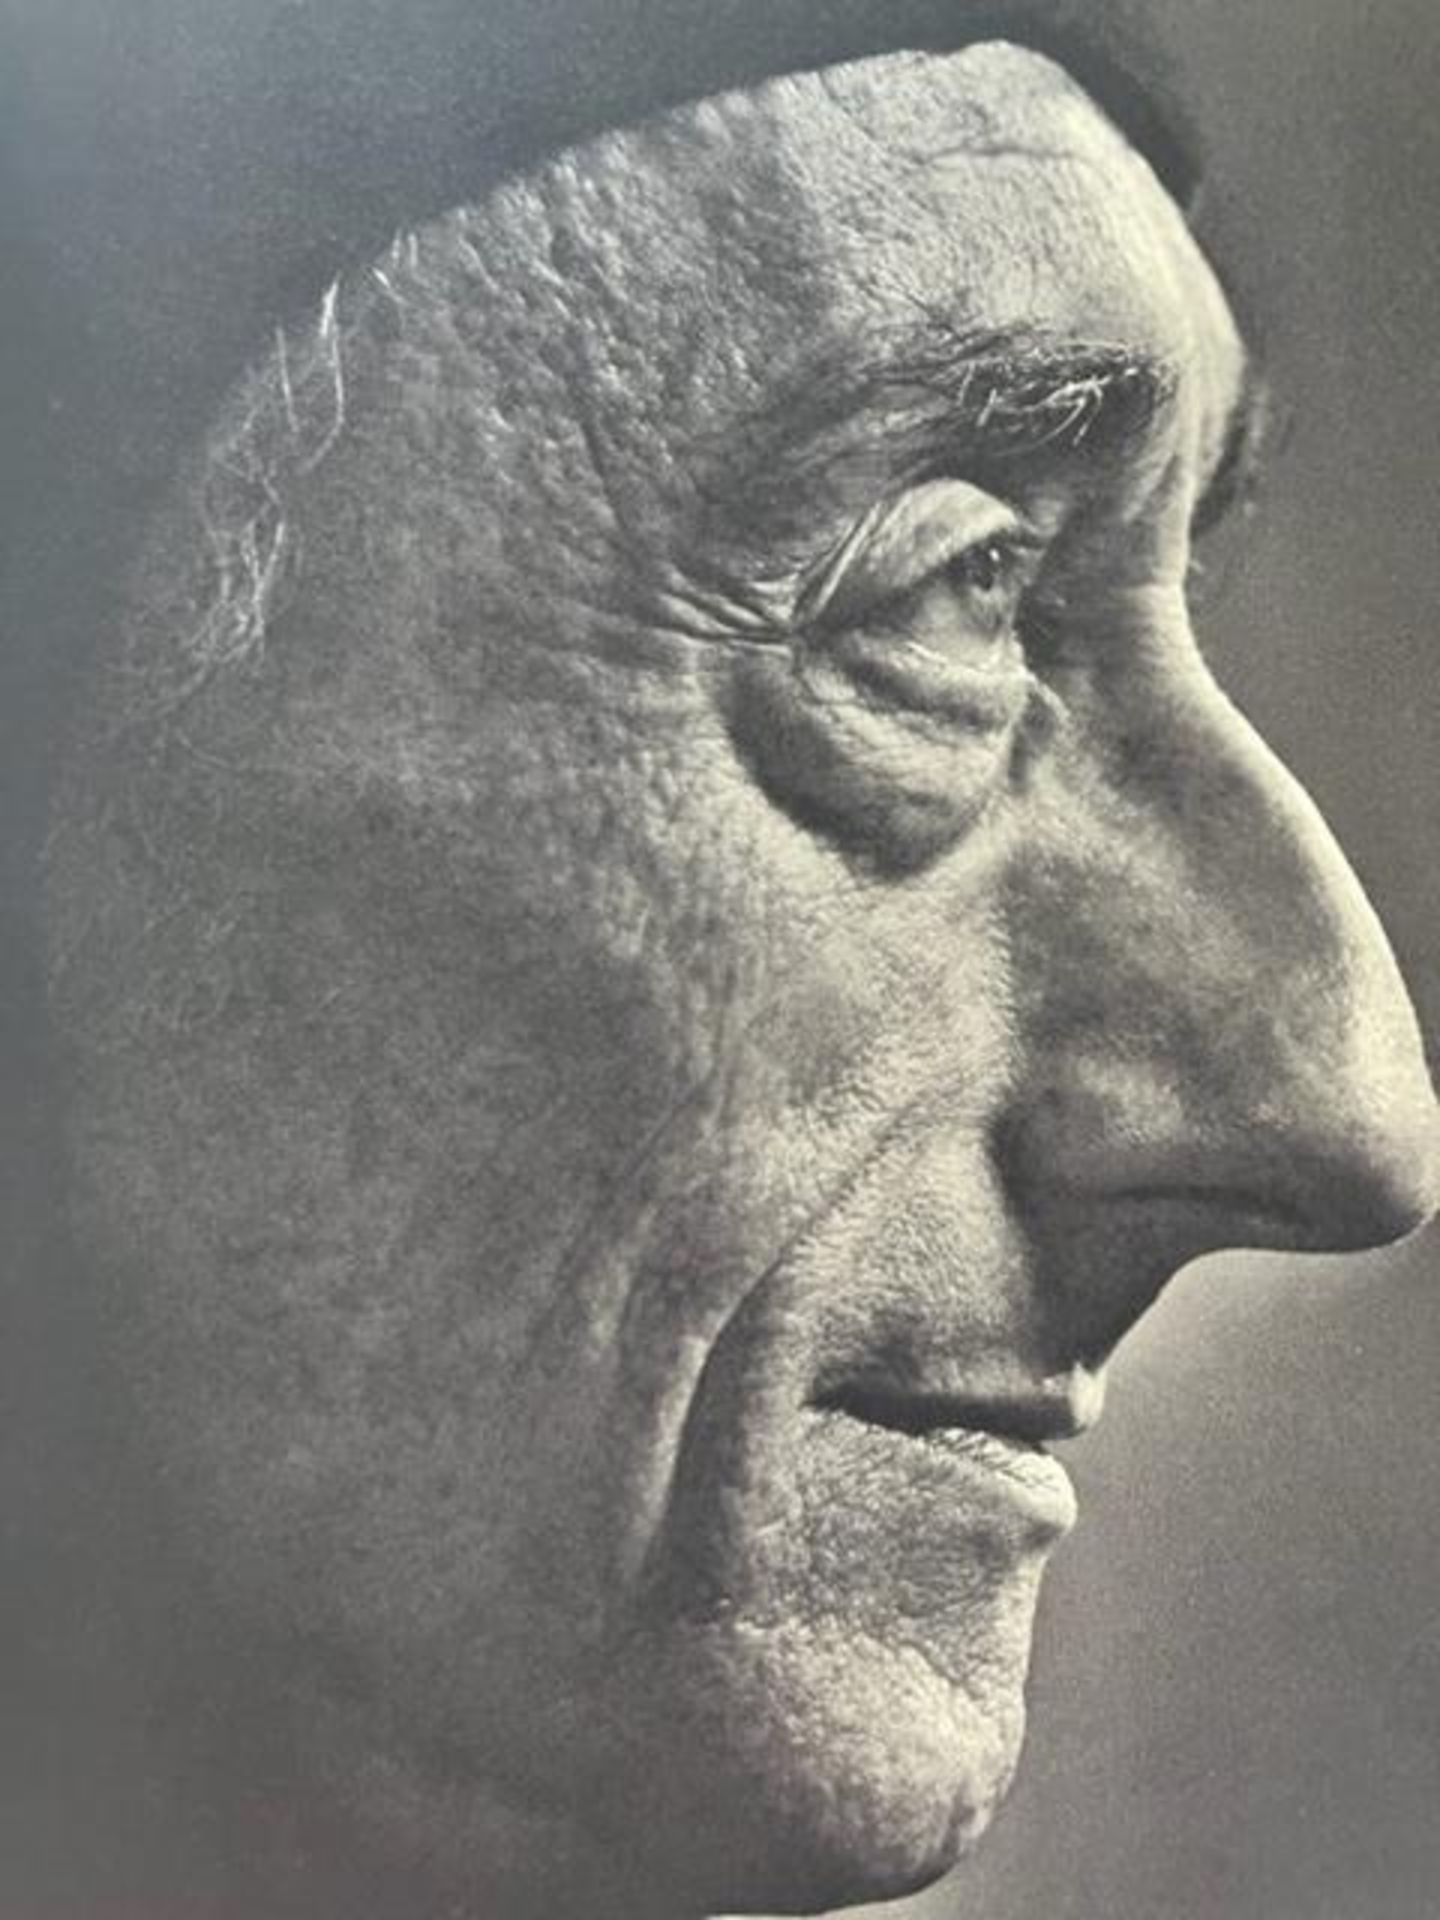 Yousuf Karsh "Jacques Cousteau" Print. - Image 3 of 6